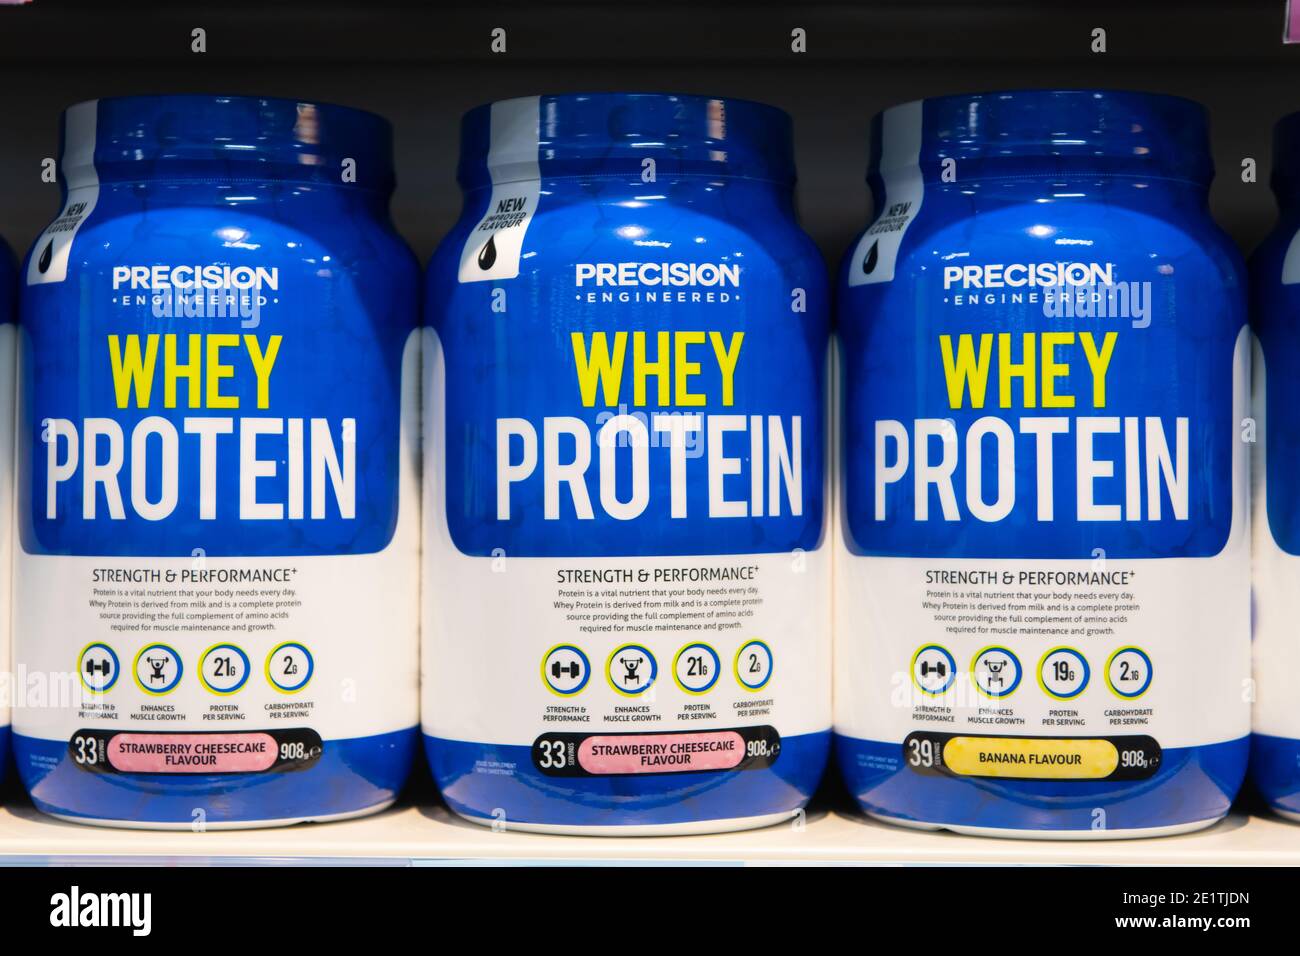 https://c8.alamy.com/comp/2E1TJDN/large-bottles-of-whey-protein-on-sale-on-a-shelf-in-a-supermarket-in-cardiff-wales-united-kingdom-2E1TJDN.jpg